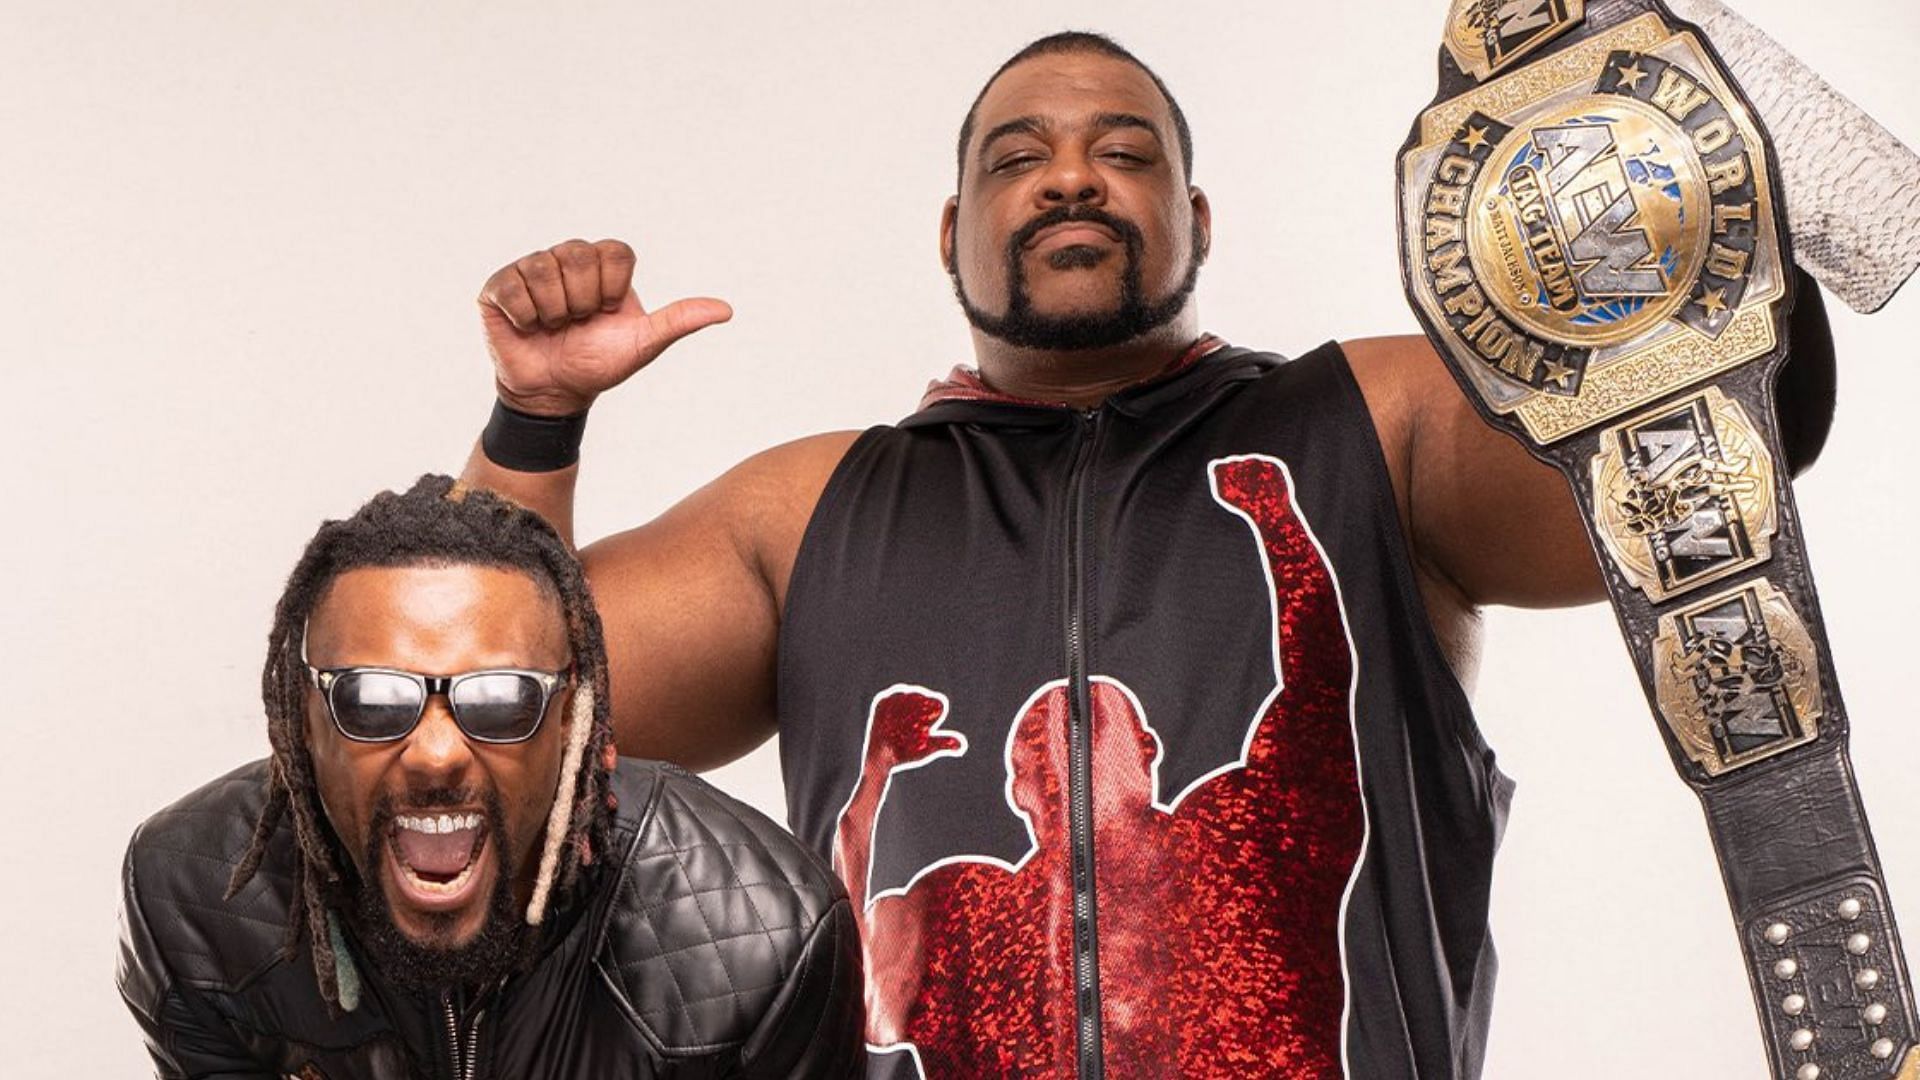 Keith Lee and Swerve Strickland with the AEW Tag Team Championships